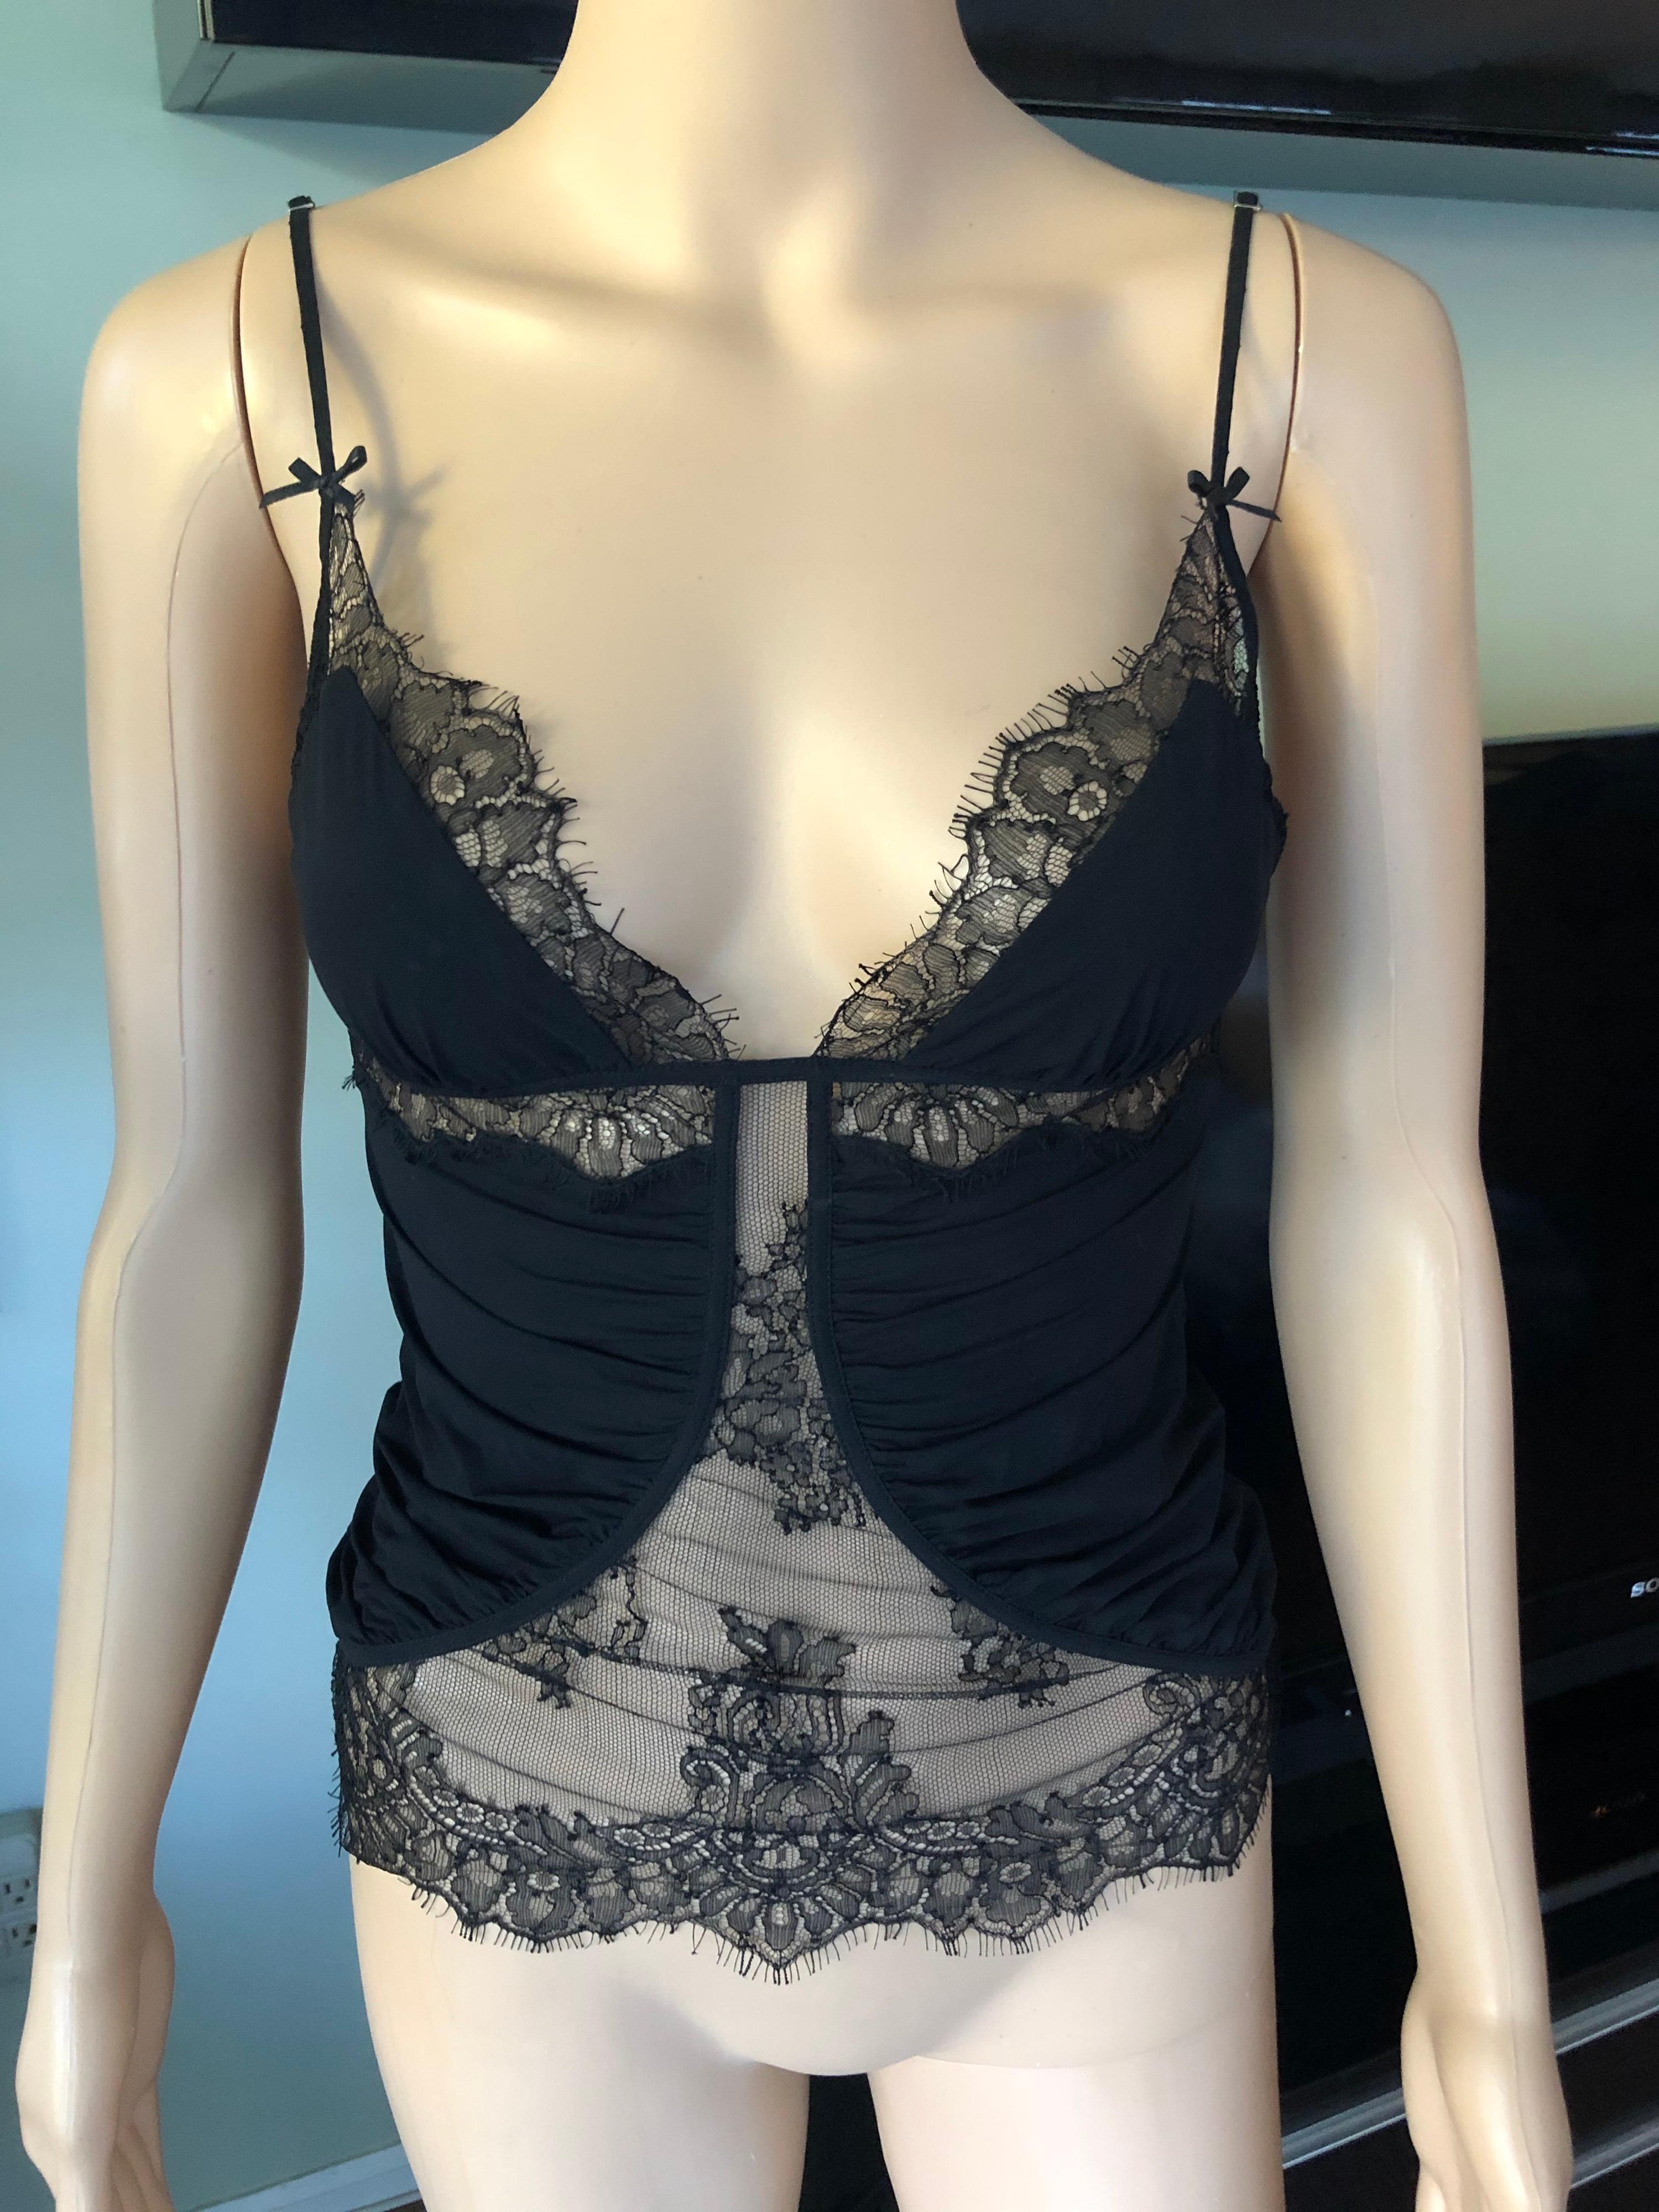 Gucci Sheer Lace Panels Black Top Size S

Gucci sexy black top featuring plunging neckline and sheer lace accents throughout.
